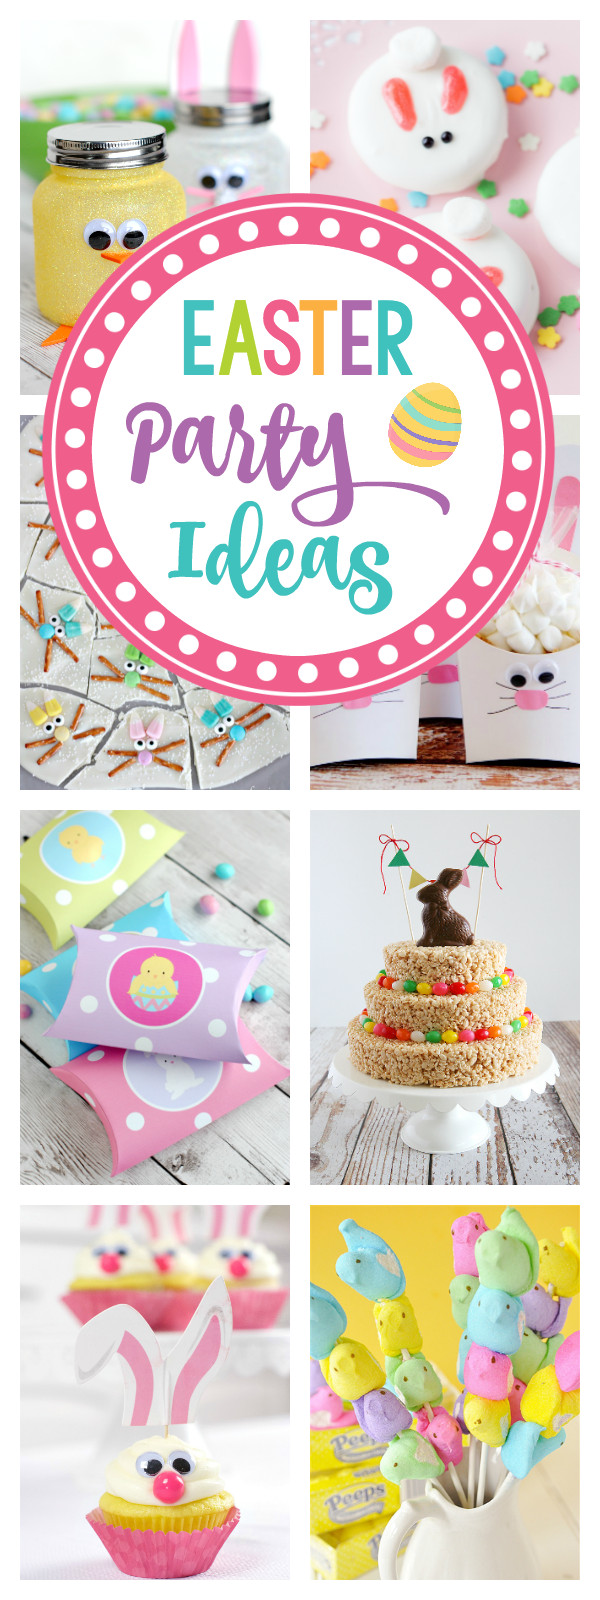 Kid Easter Party Ideas
 25 Fun Easter Party Ideas for Kids – Fun Squared